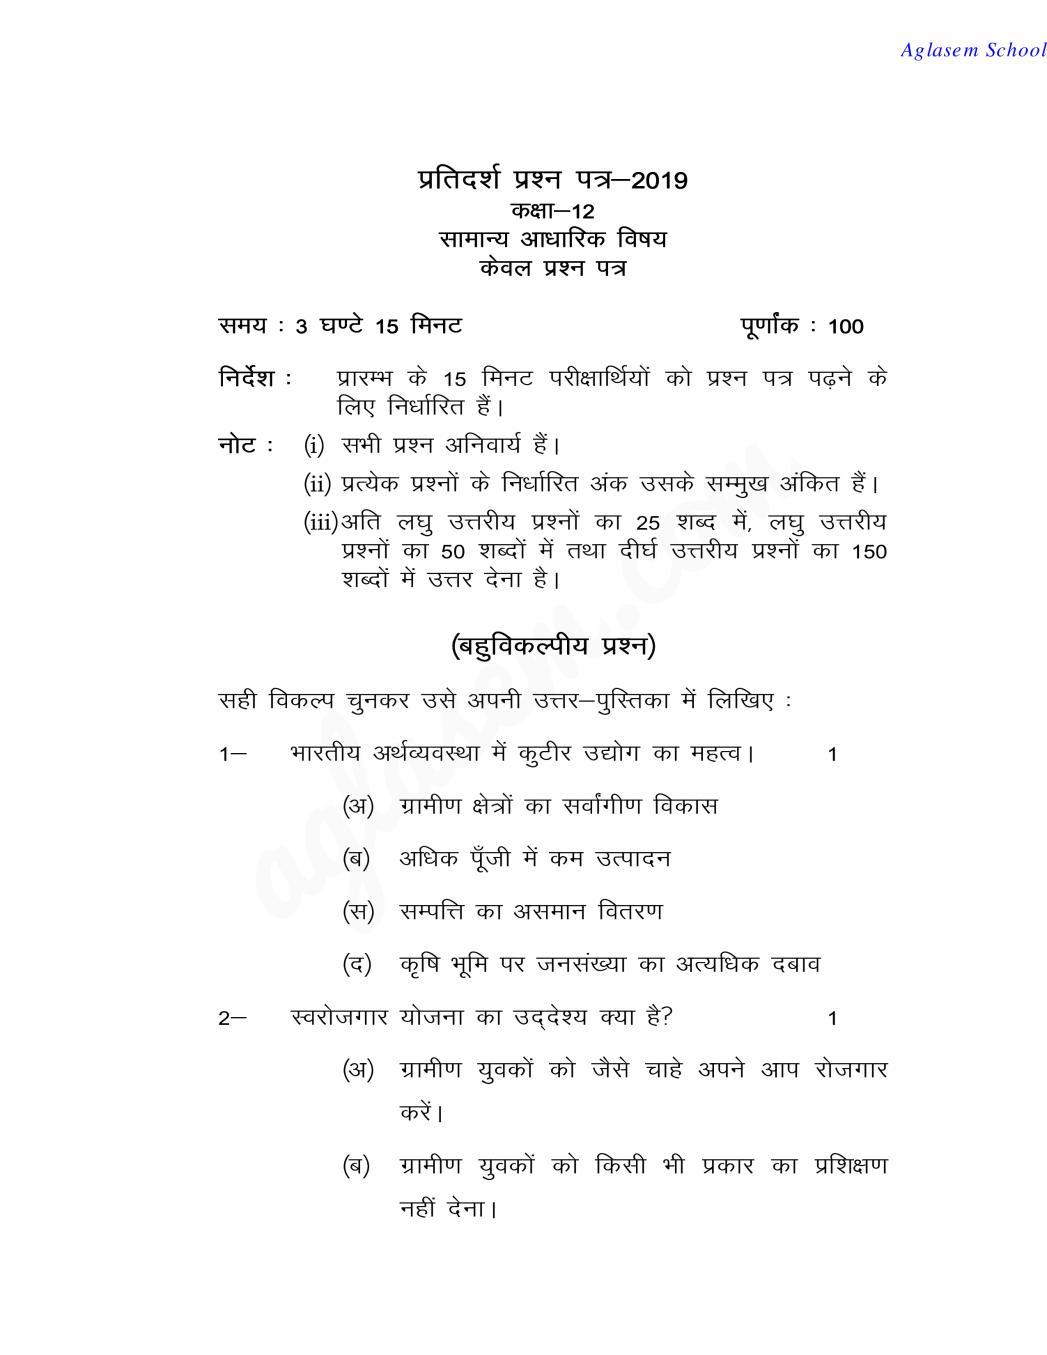 UP Board Class 12 Model Paper 2019 GENERAL FOUNDATION SUBJECT - Page 1